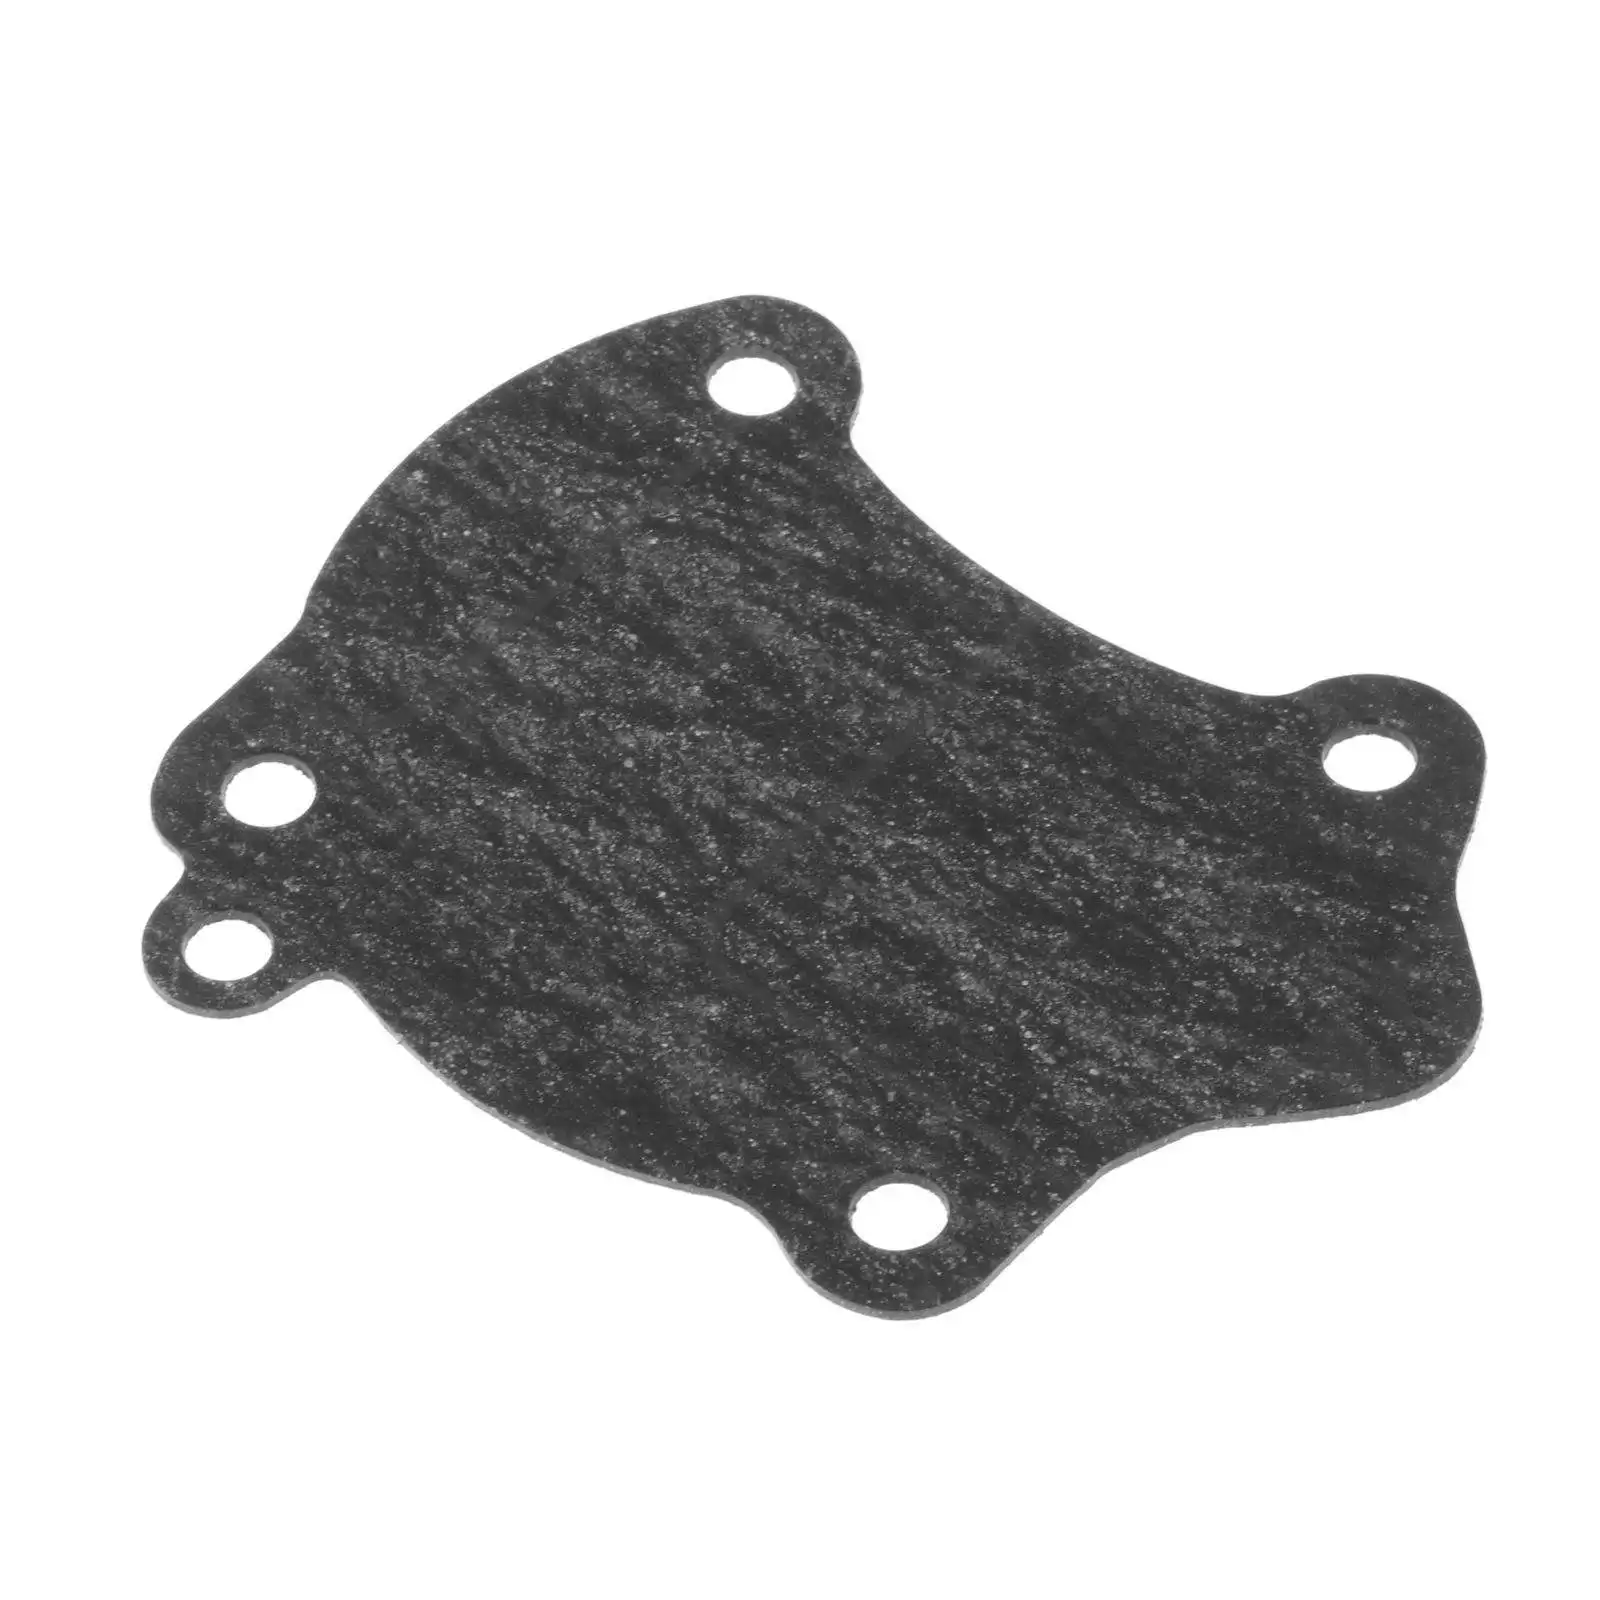 New Head Cover Gasket Replacement for Yamaha Outboard 4  5  2 Stroke